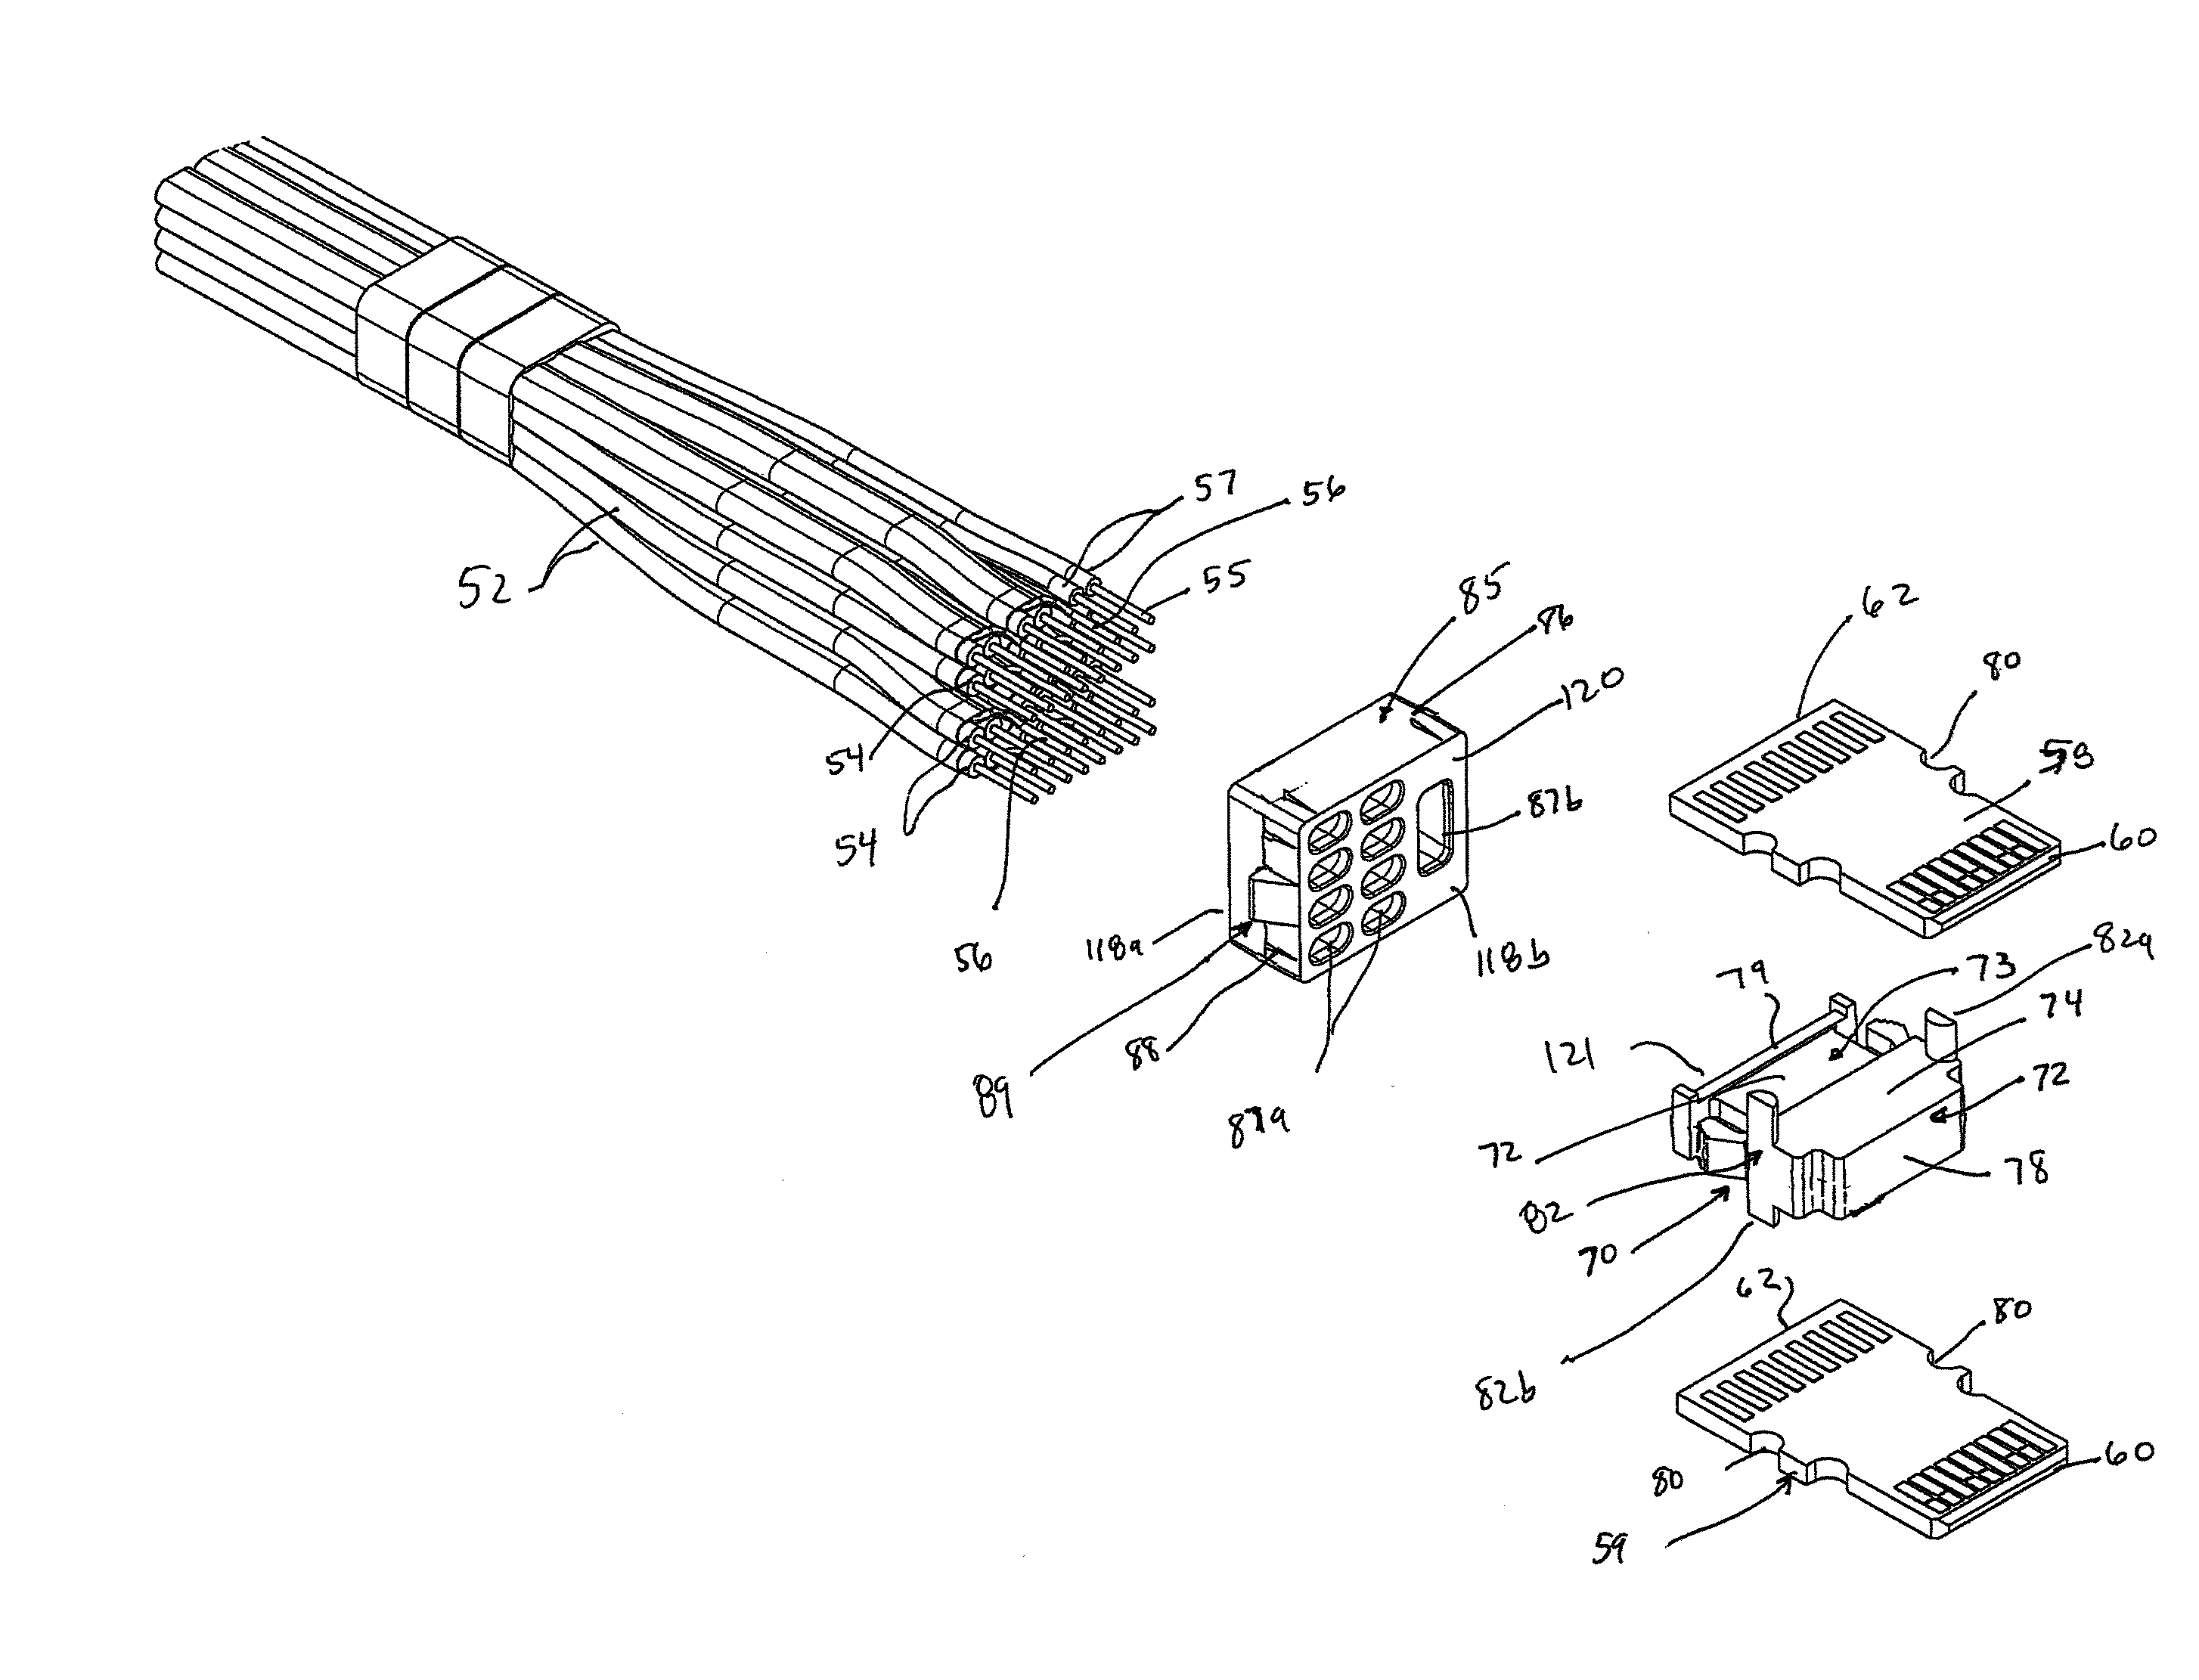 Plug connector with improved construction